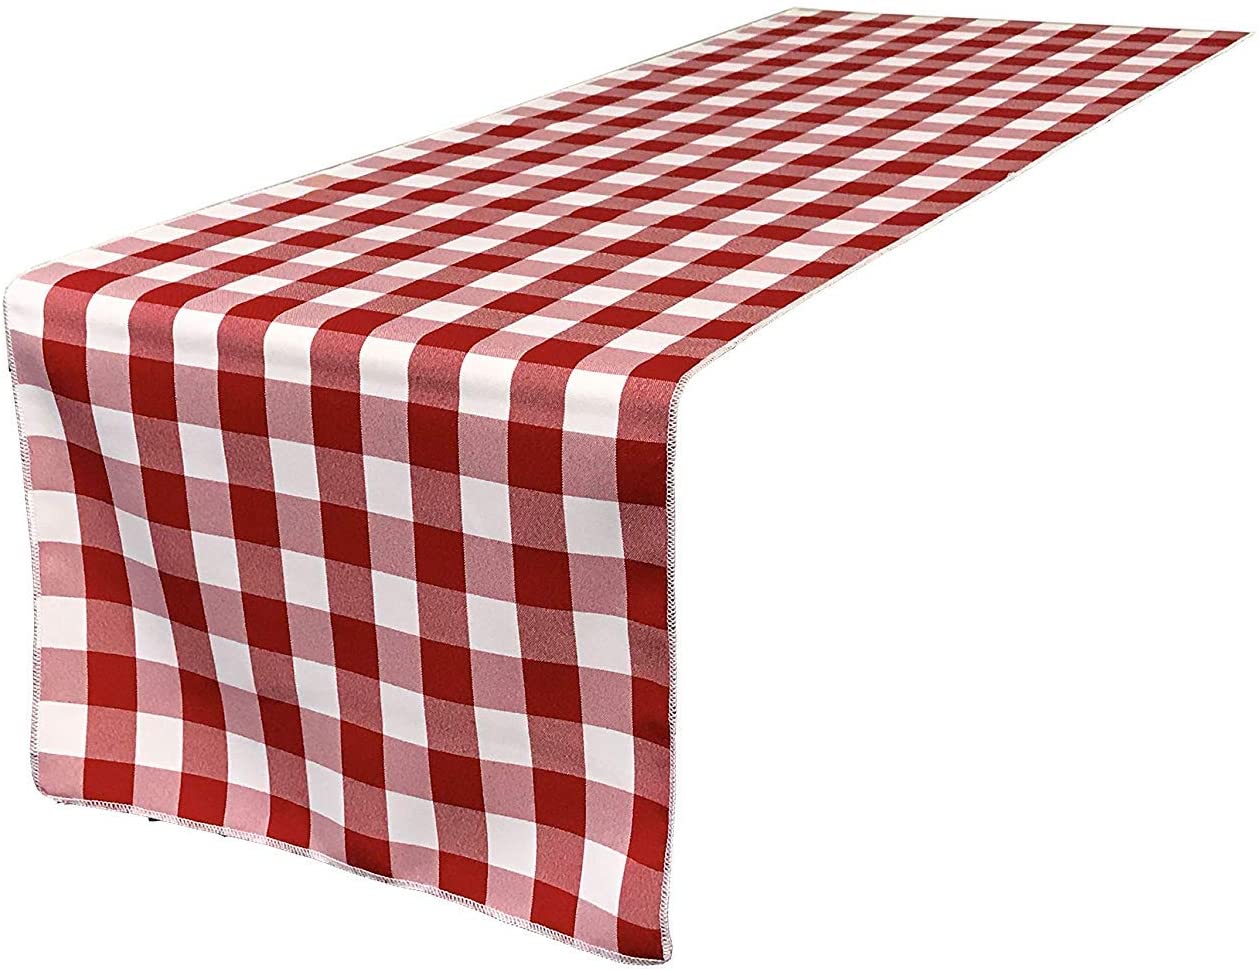 12" Wide by The Size of Your Choice, Polyester Poplin Gingham, Checkered, Plaid Table Runner (White & Red,